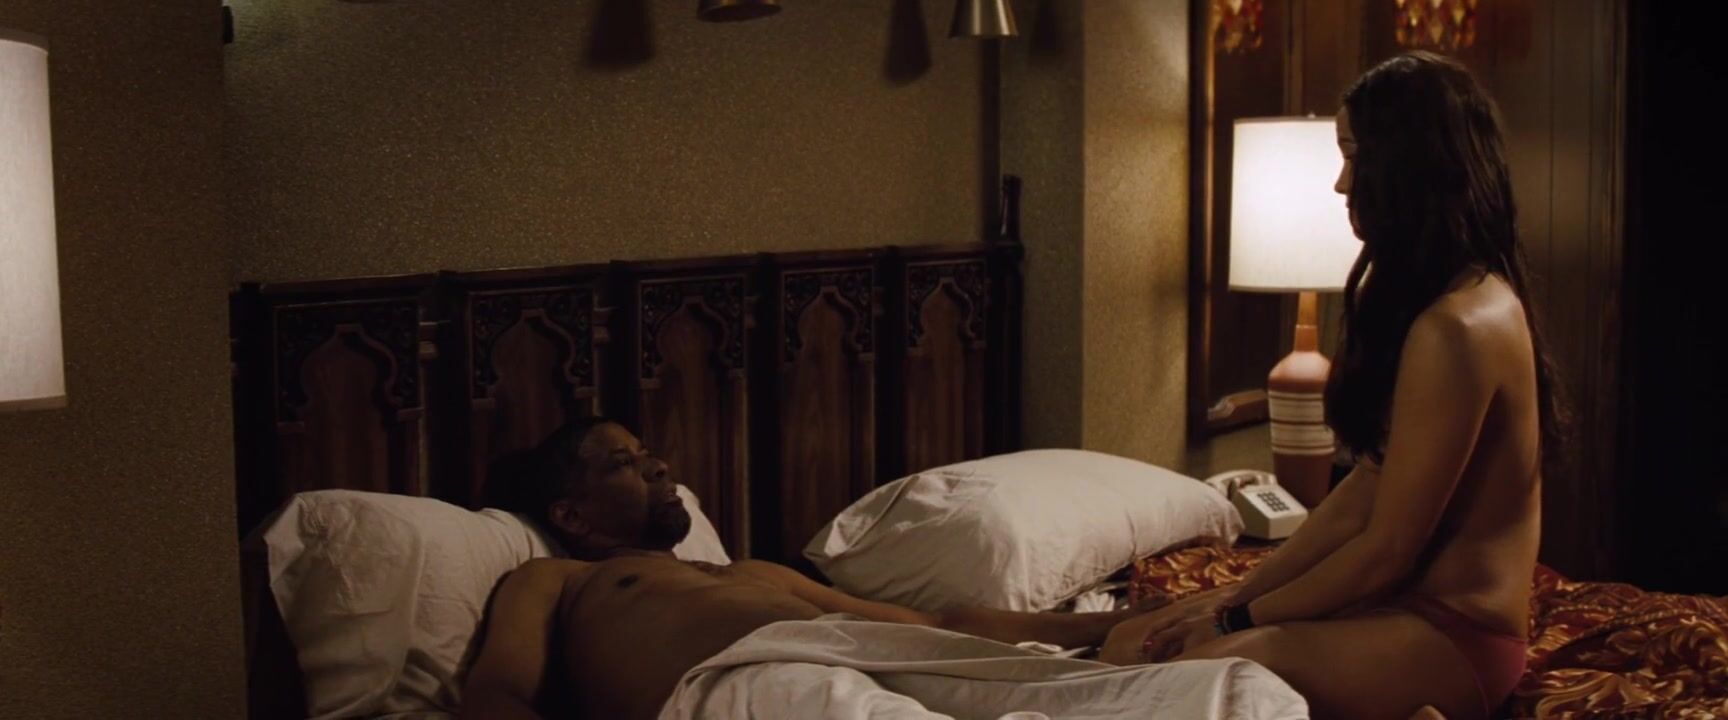 Dick Suckers Paula Patton manages to excite black man during the naked moment from 2 Guns movie Hard Core Free Porn - 1